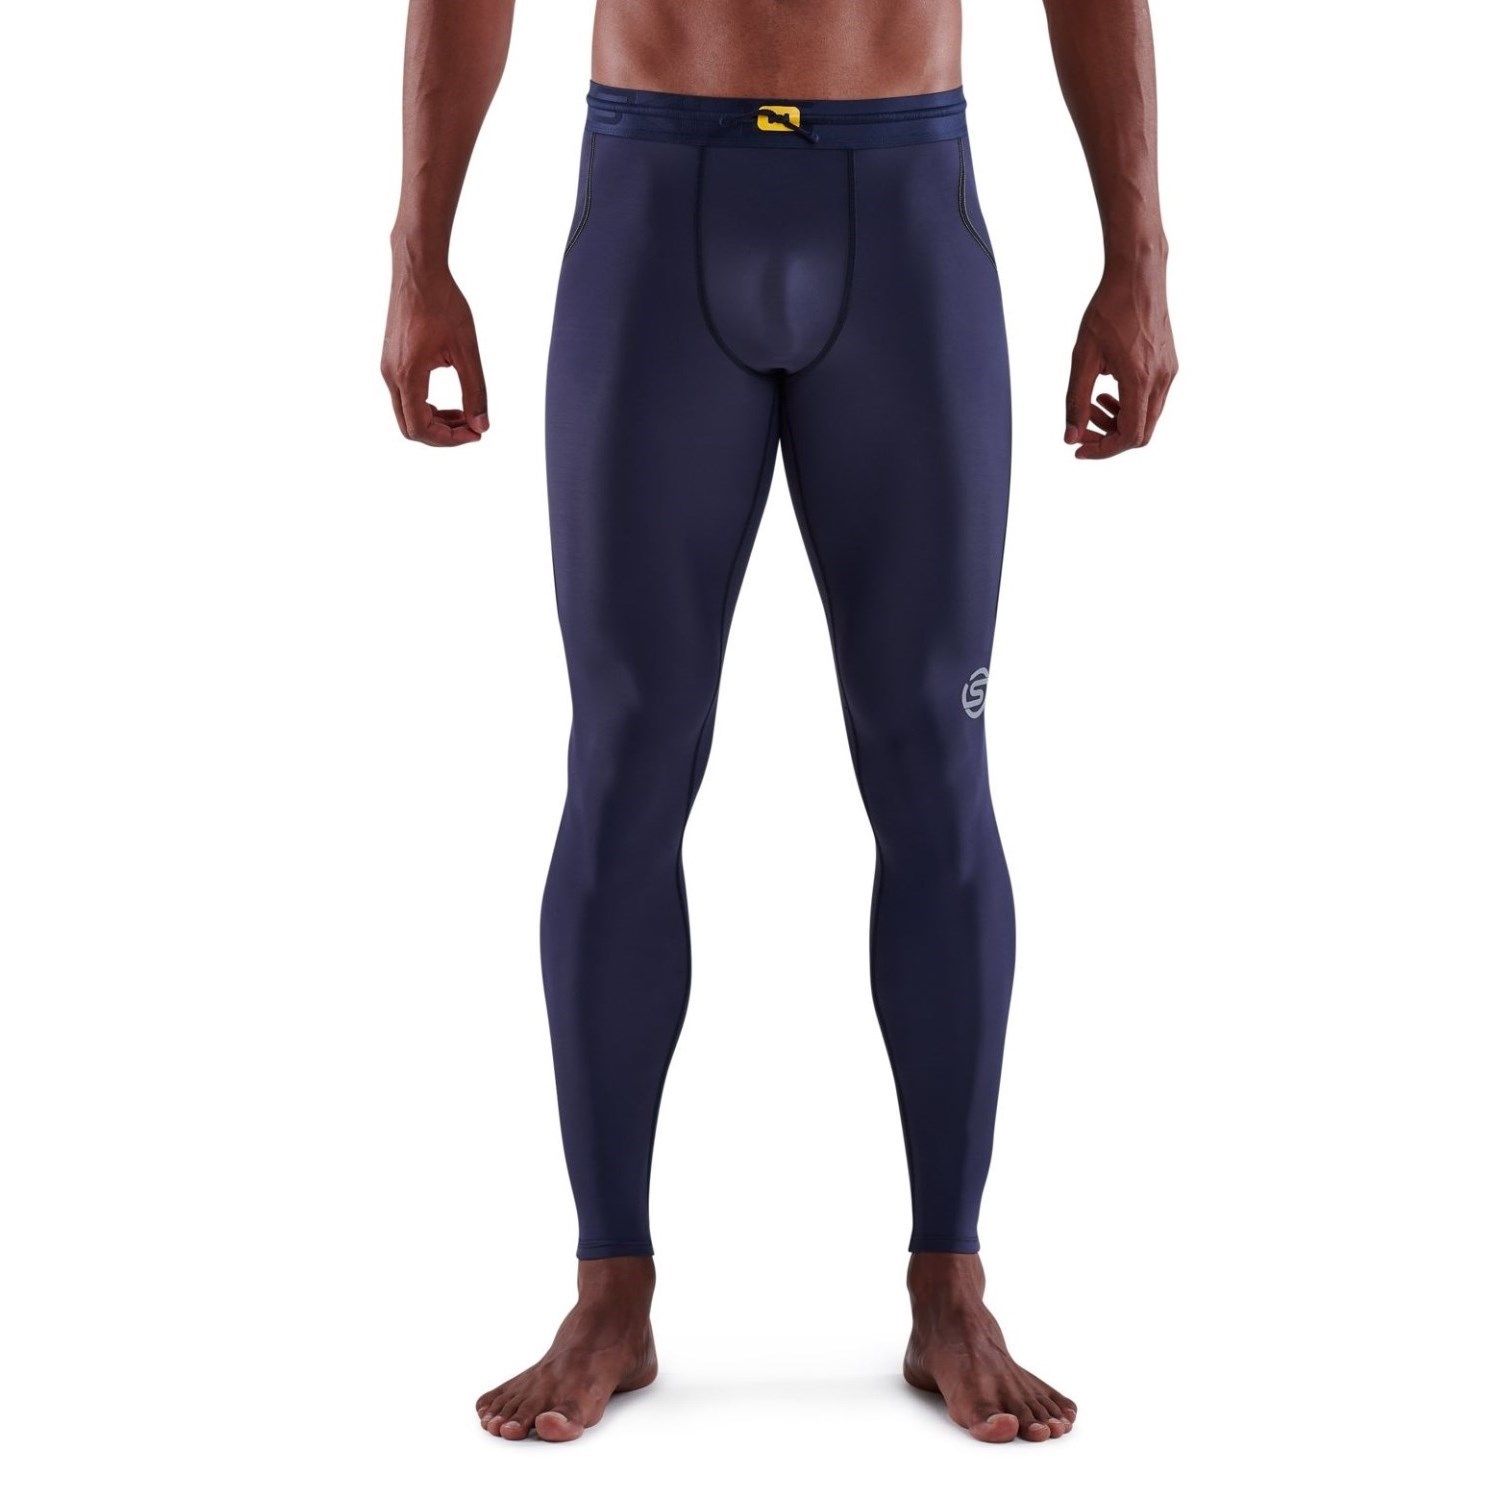 SKINS A400 Compression Tights Review  Skins compression, Race review, Compression  tights